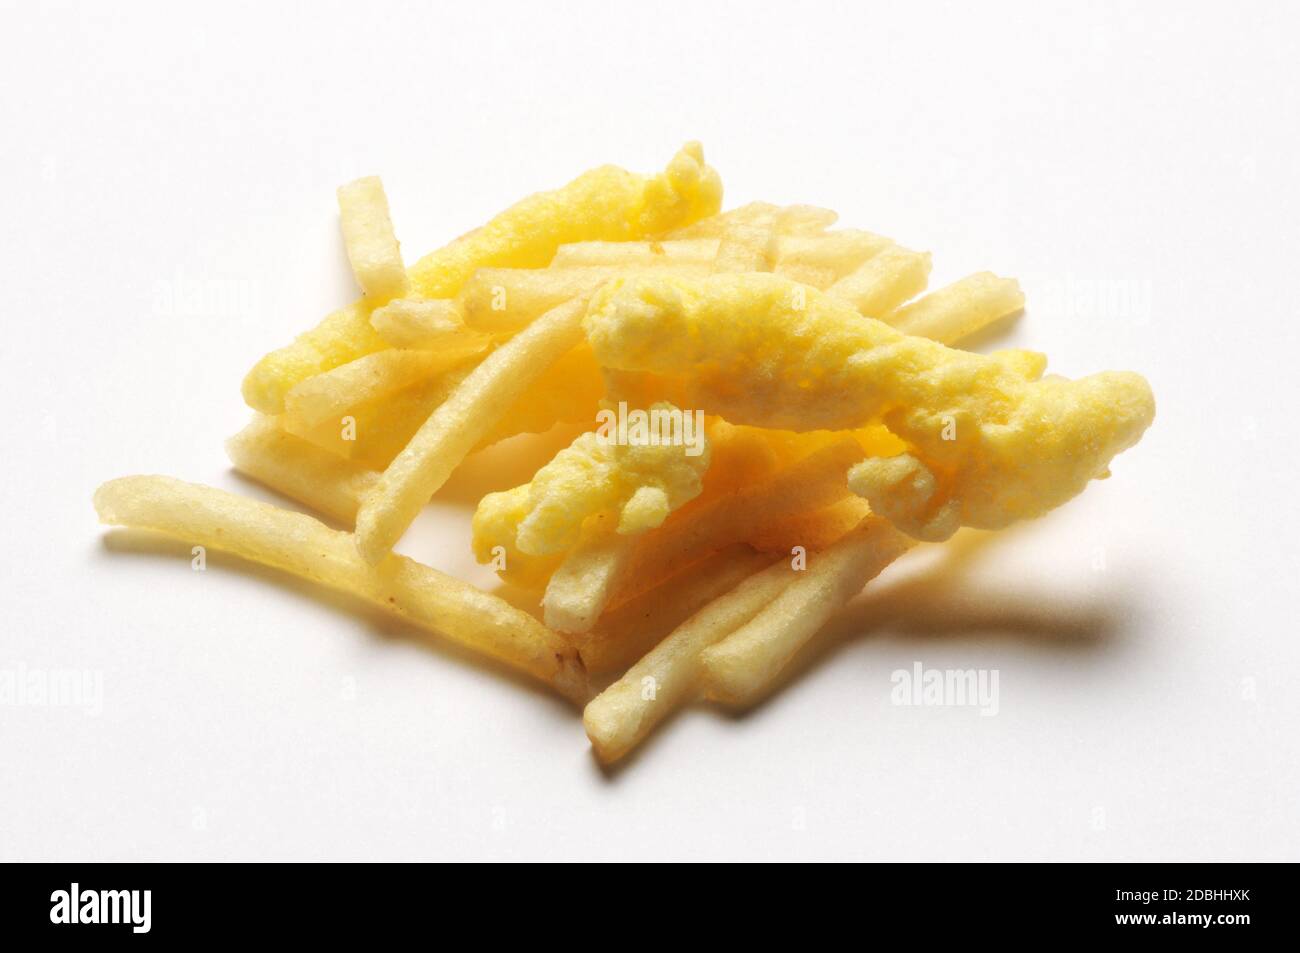 Crunchy snack with corn and french fries Stock Photo